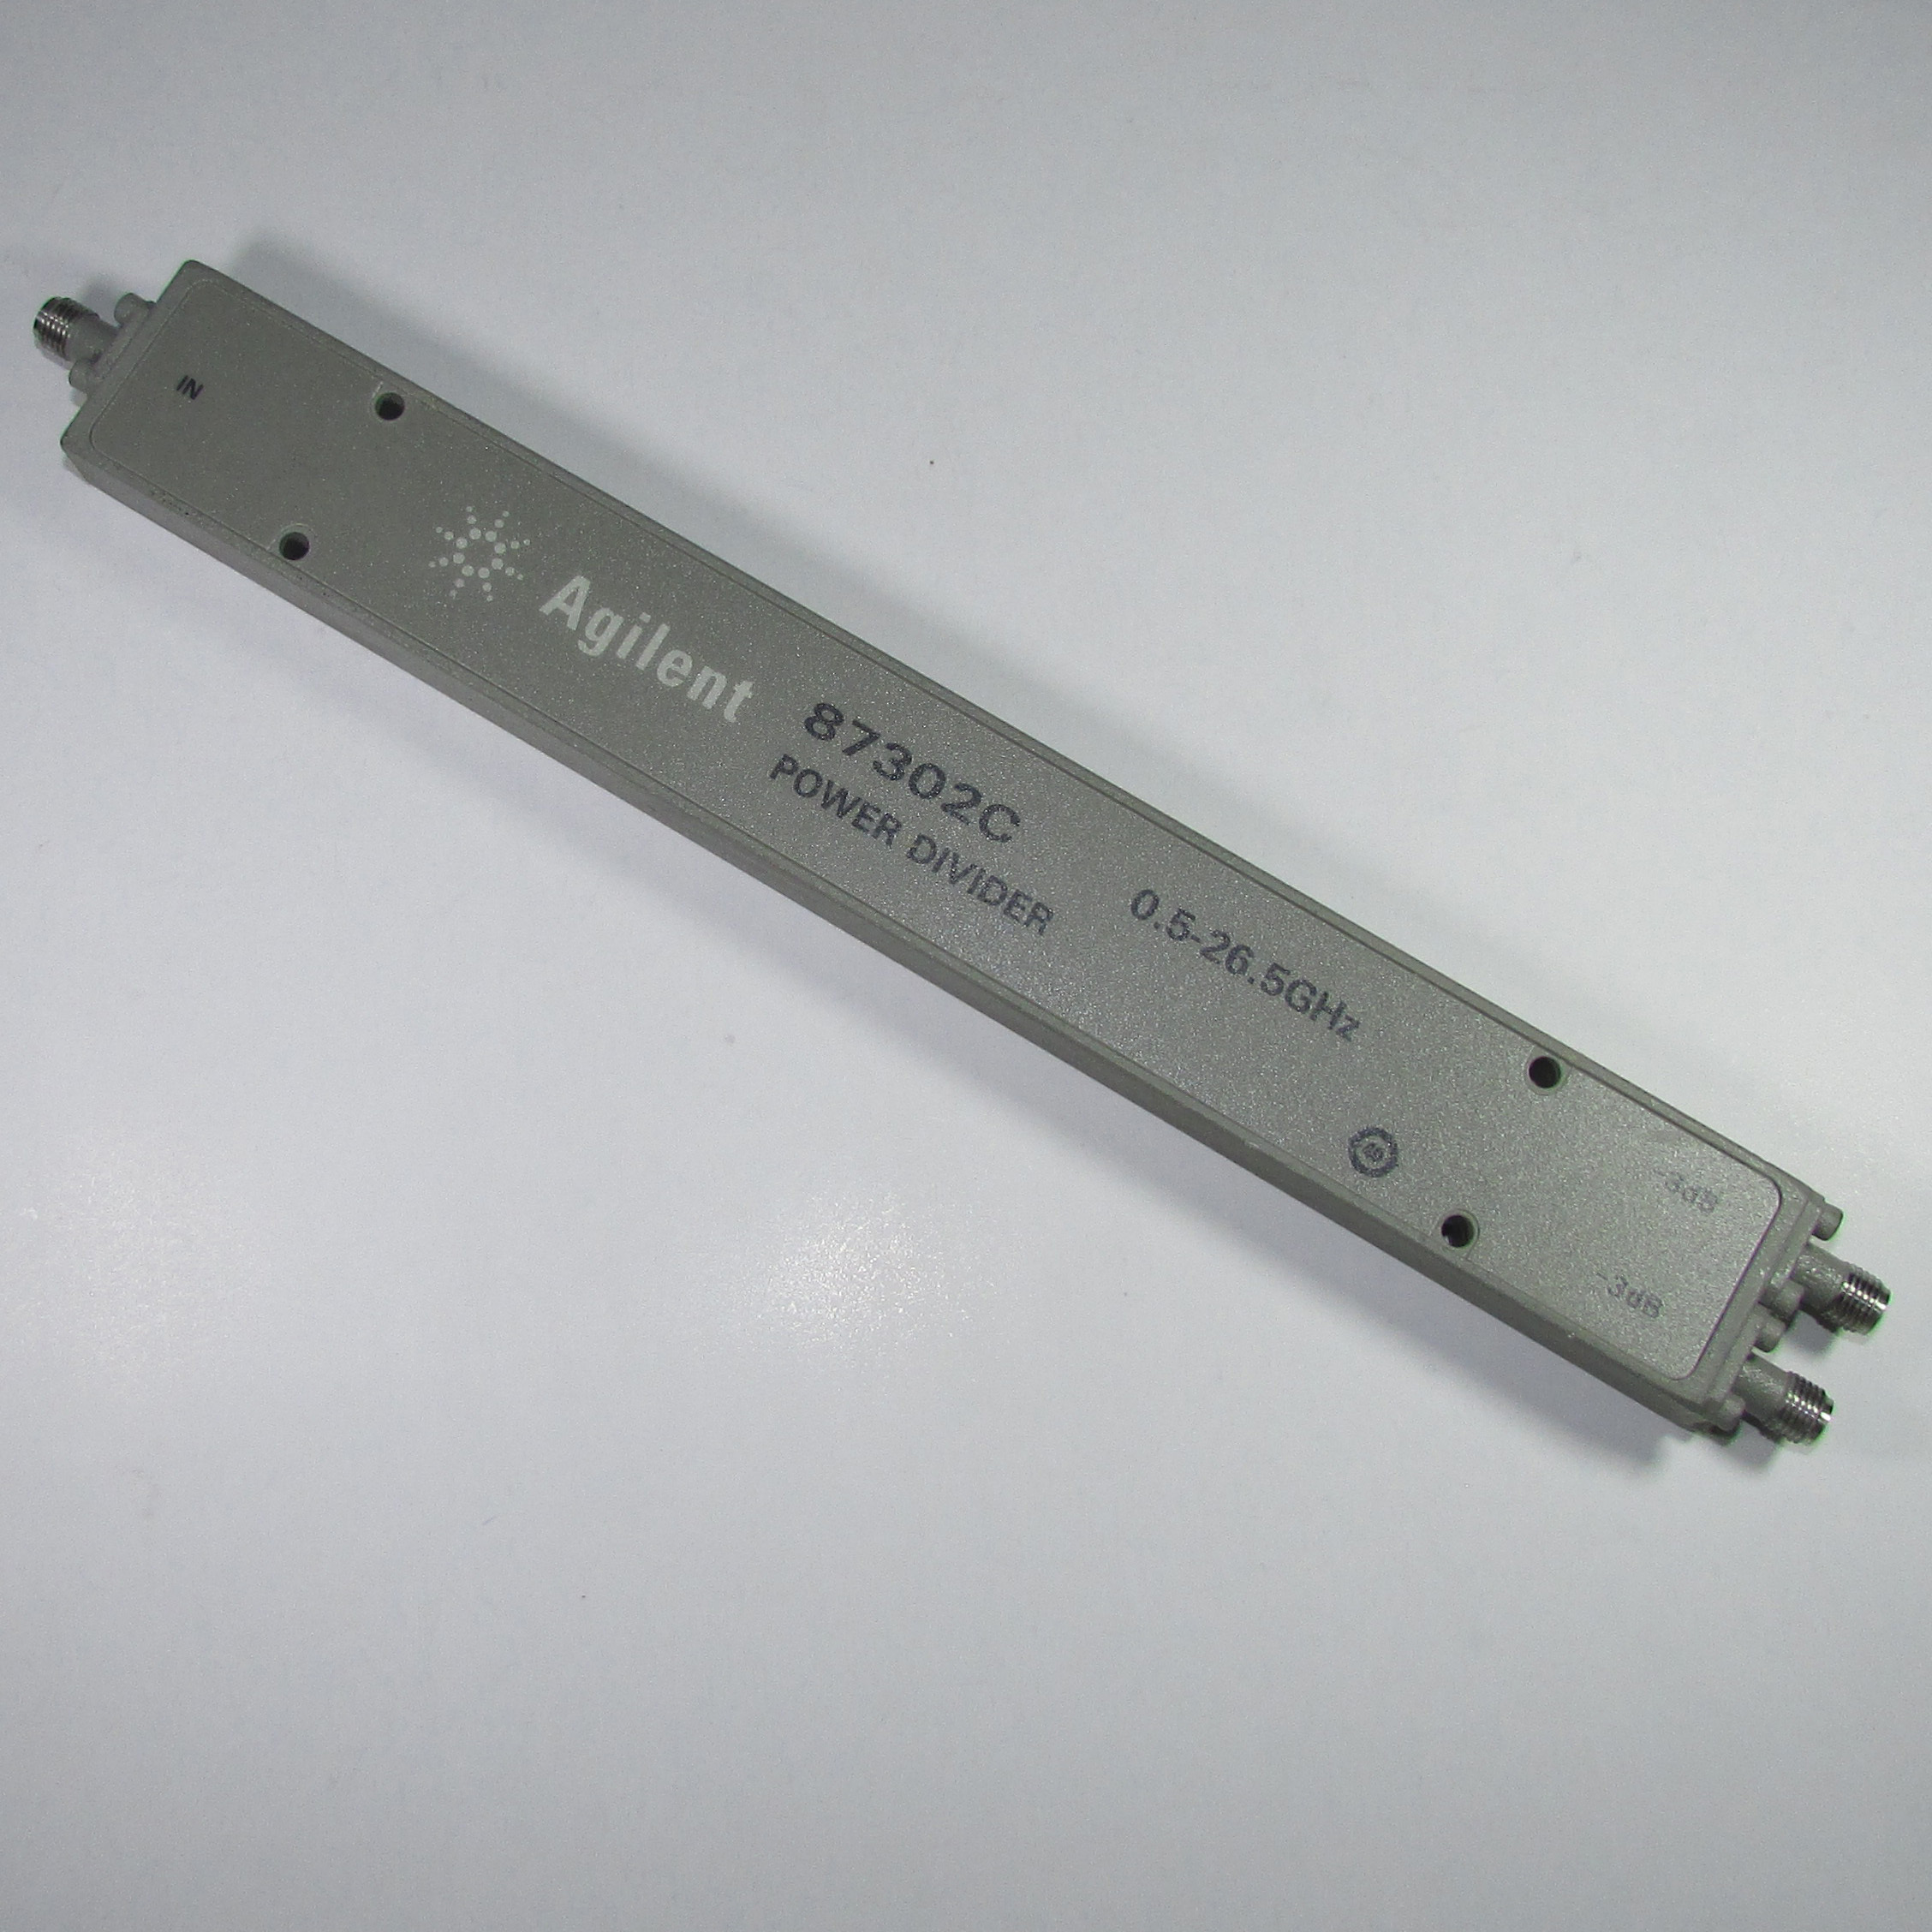 Agilent 87302C 0.5-26.5GHz 10W one point two ultra wideband power divider / 3.5mm interface